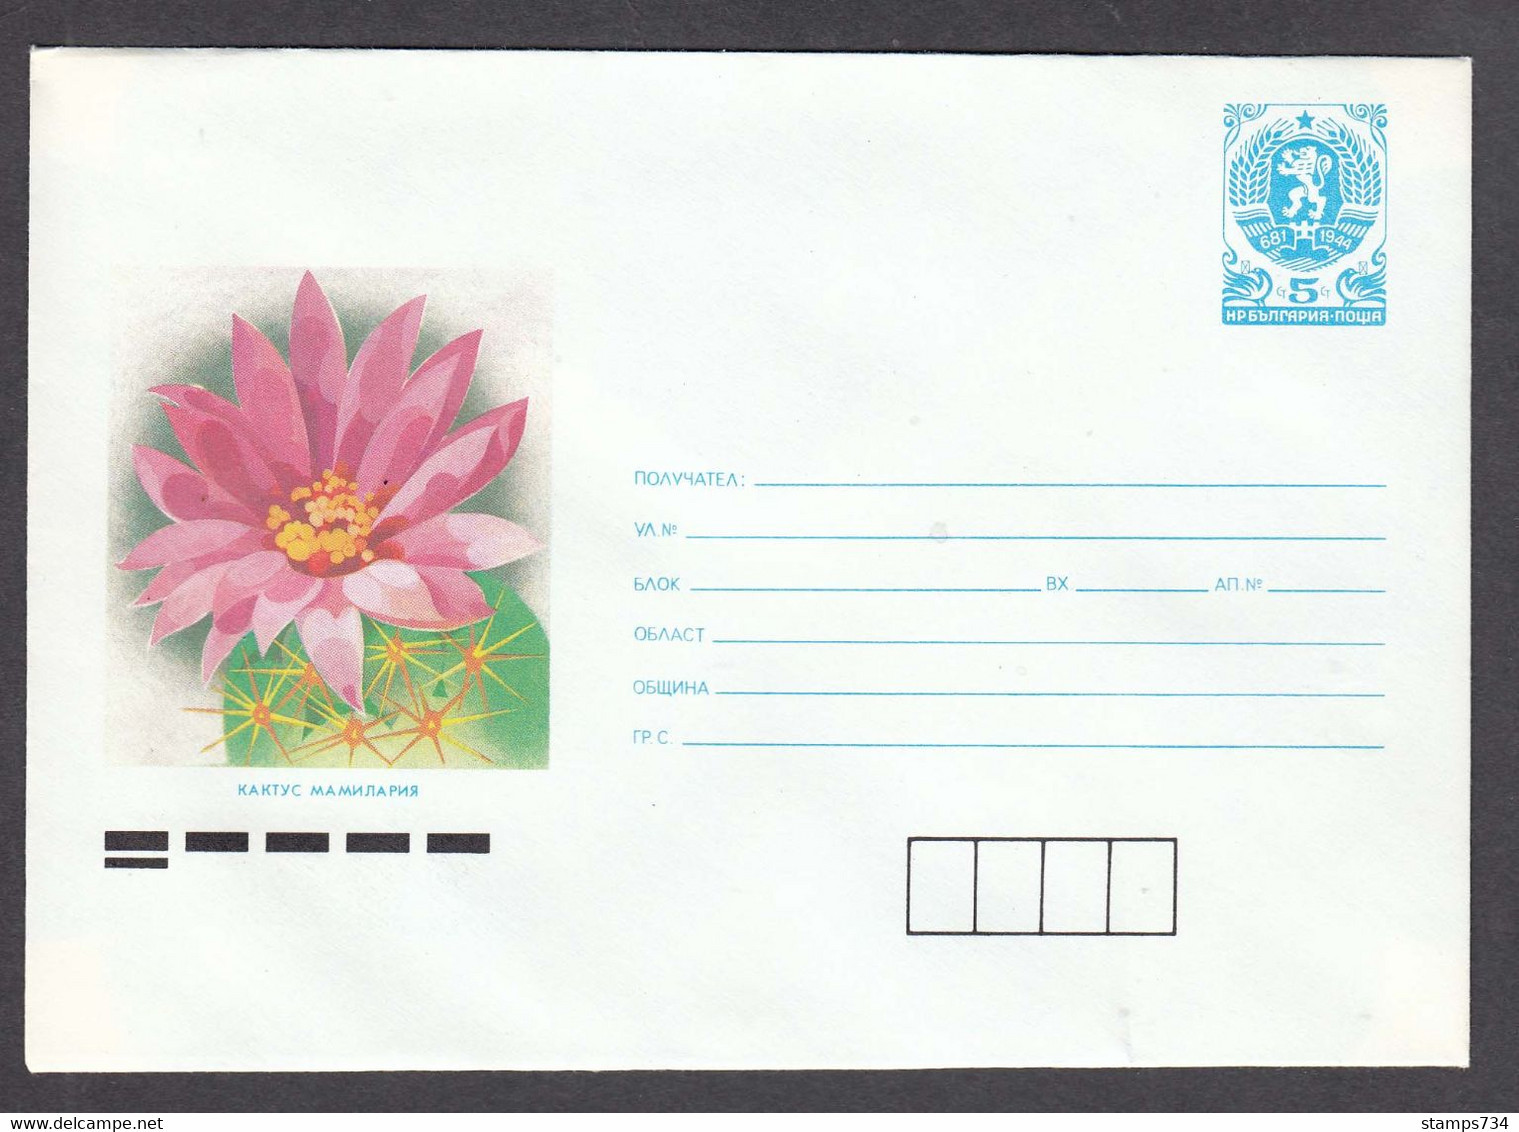 PS 959/1989 - Mint, Flower: Cactus Mamilaria, Post. Stationery - Bulgaria - Covers